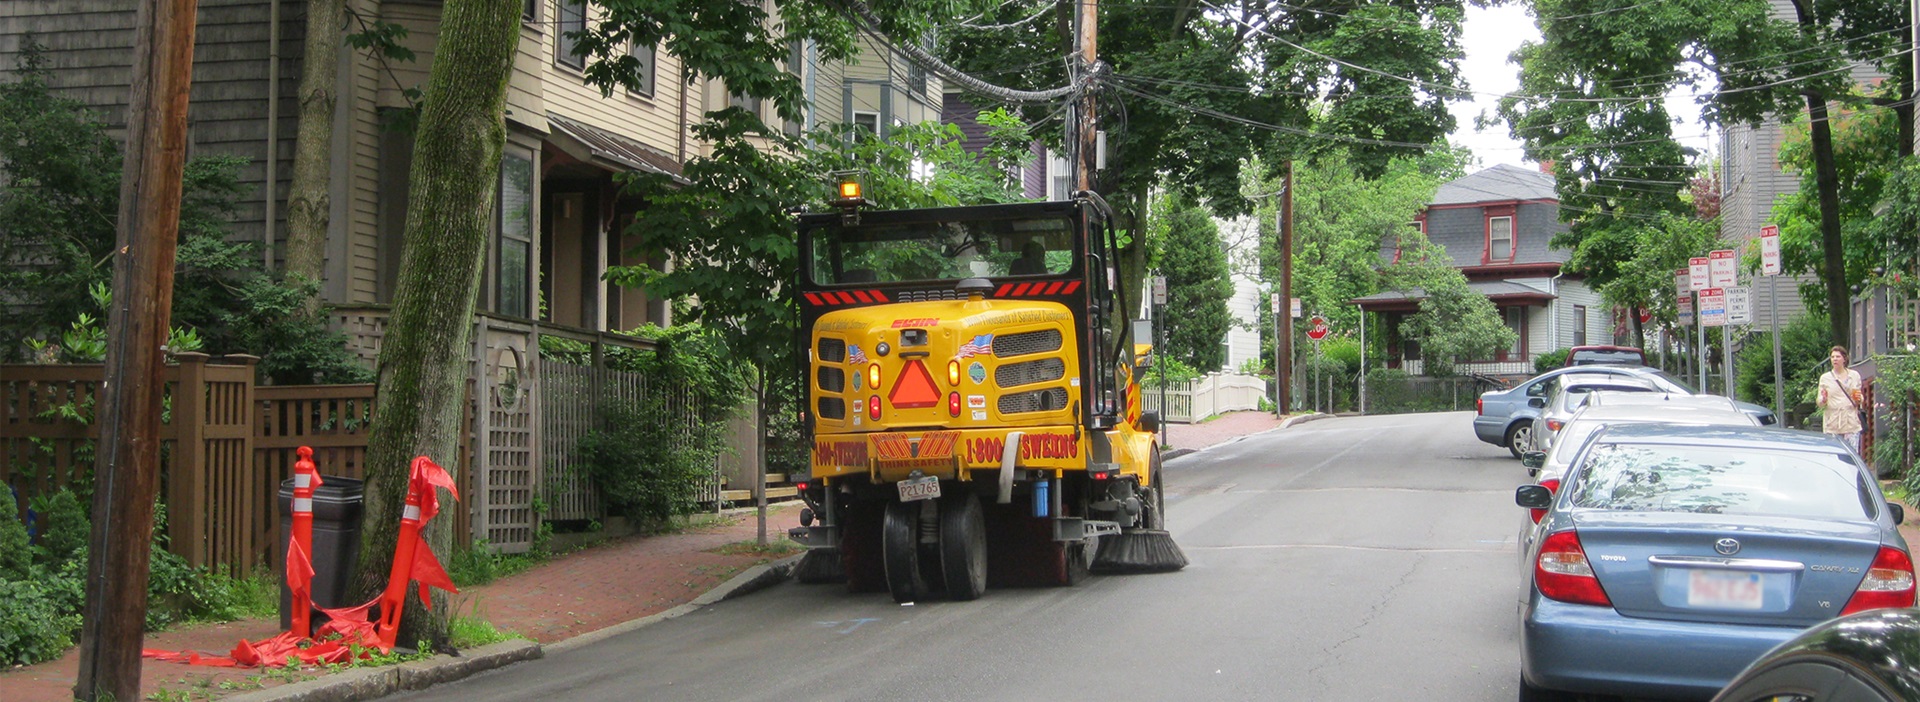 Street Sweeper cleaning roadway